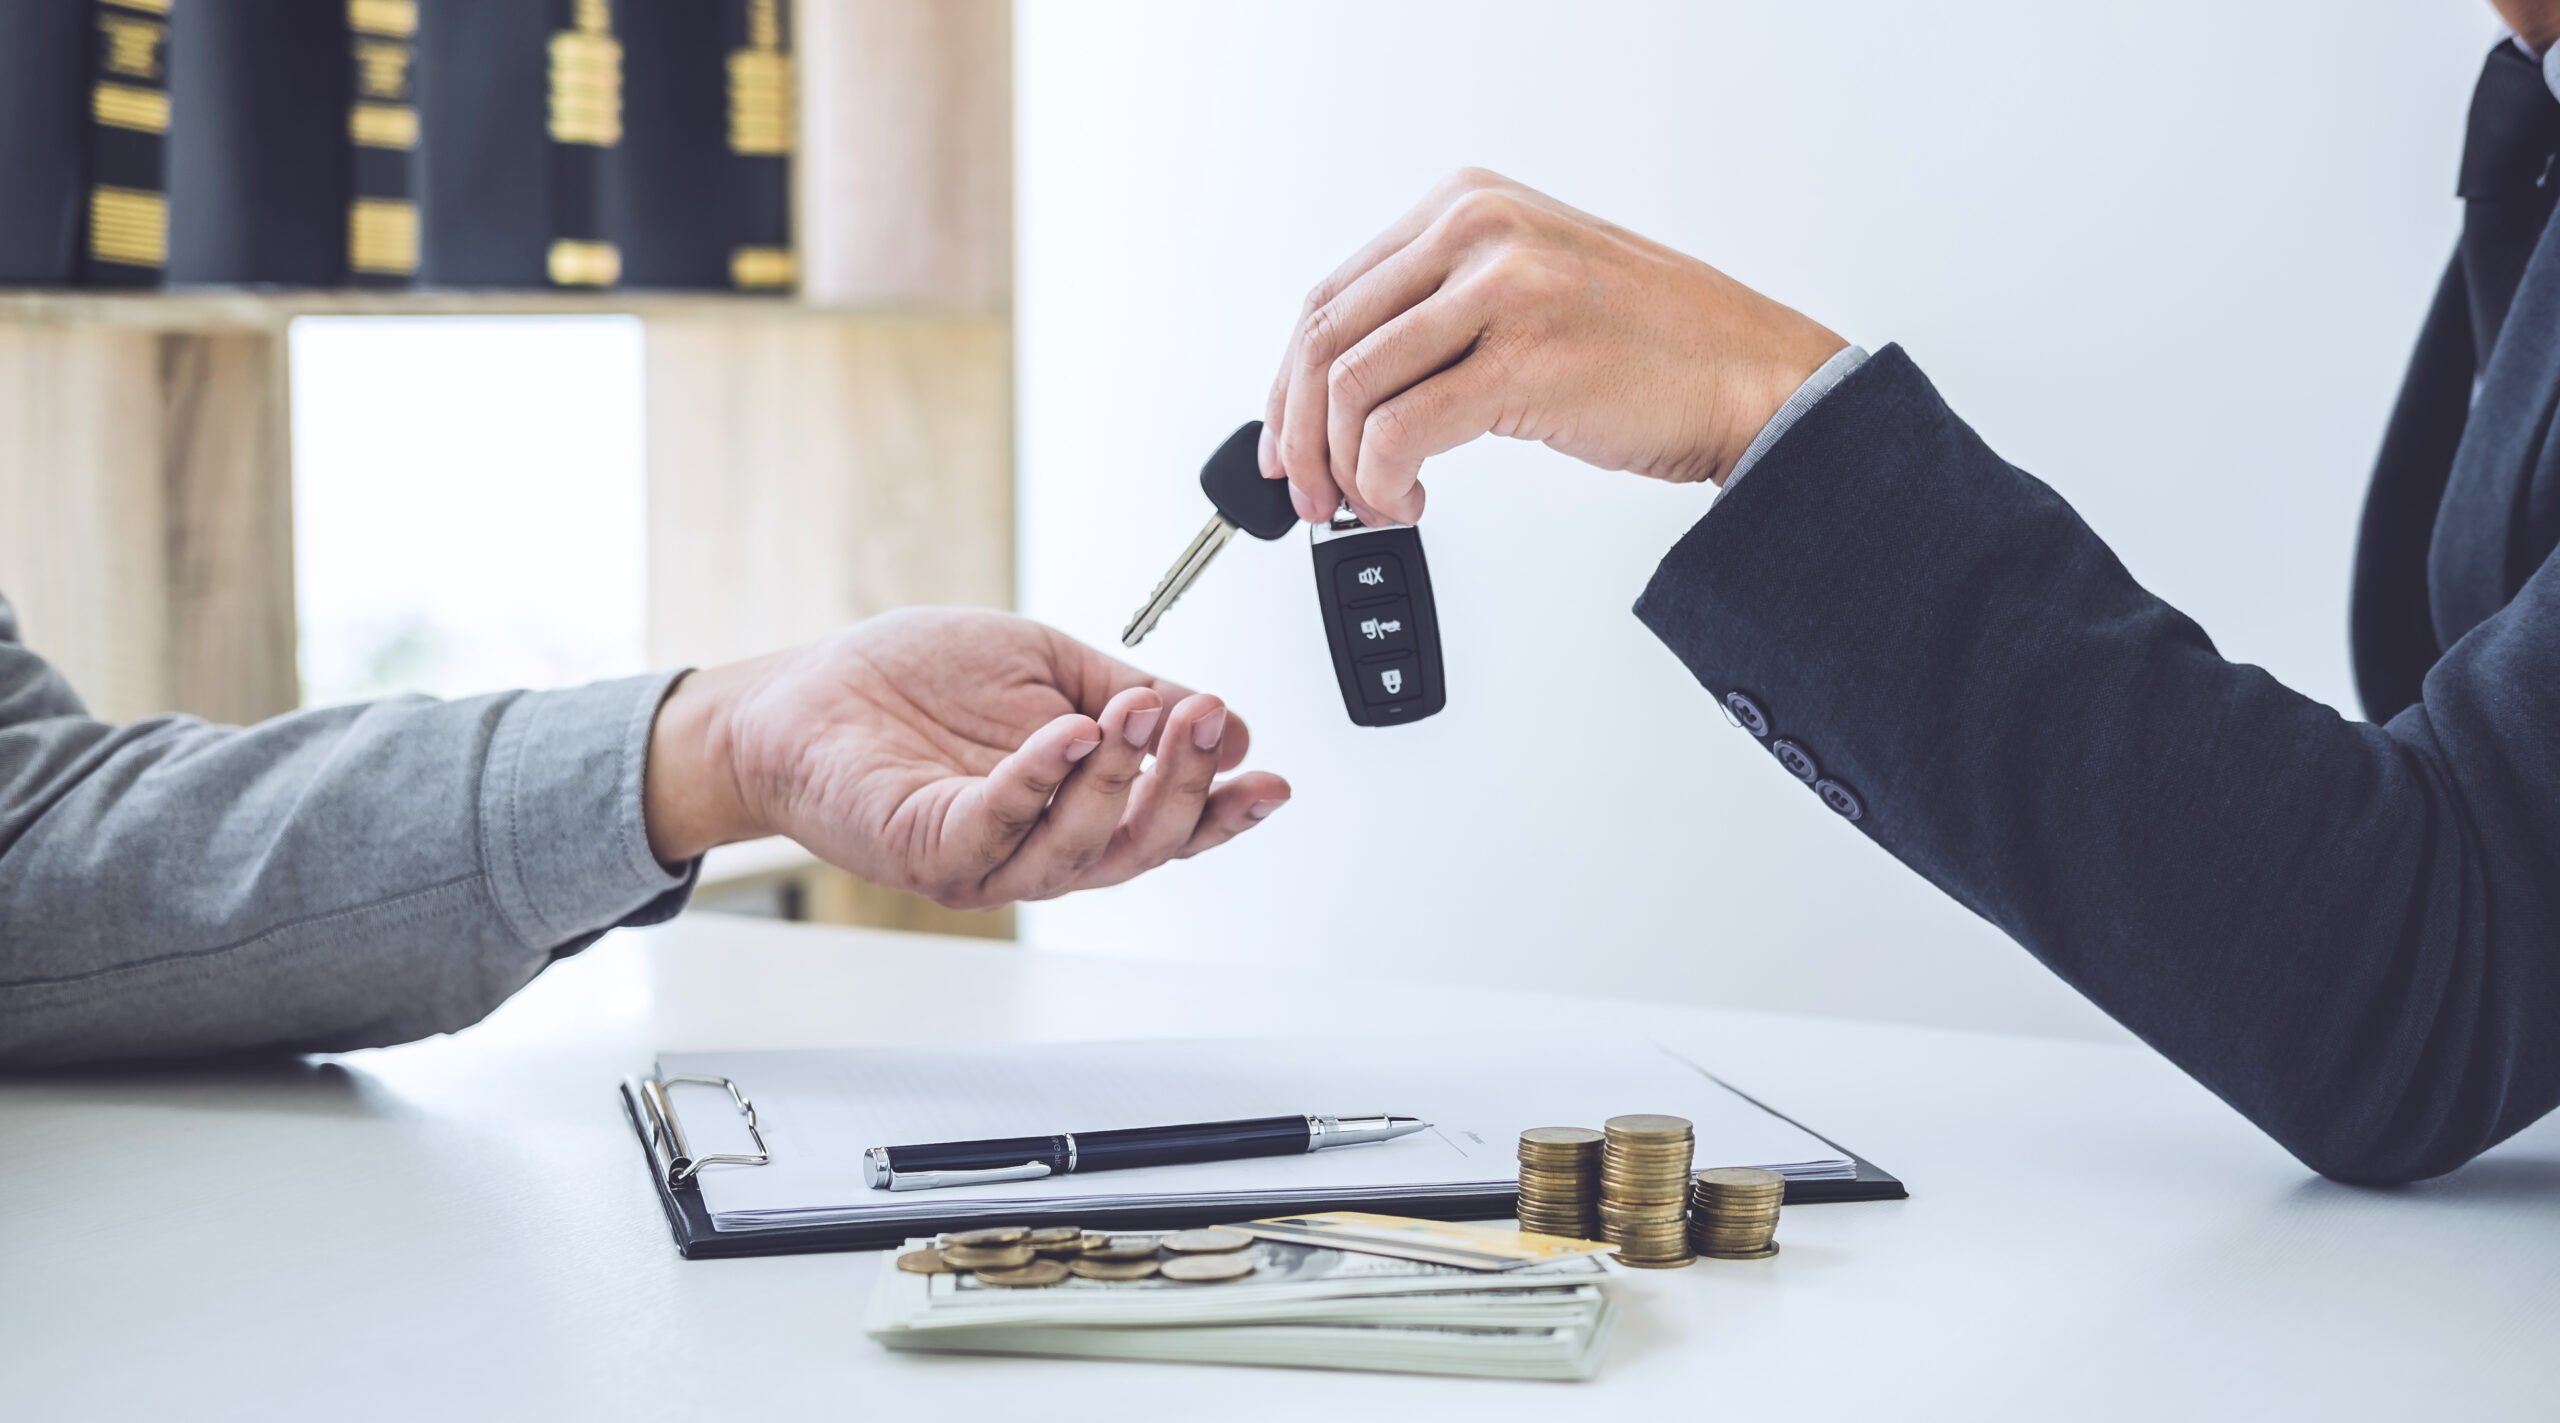 What You Should Know While Getting a Business Car Loan